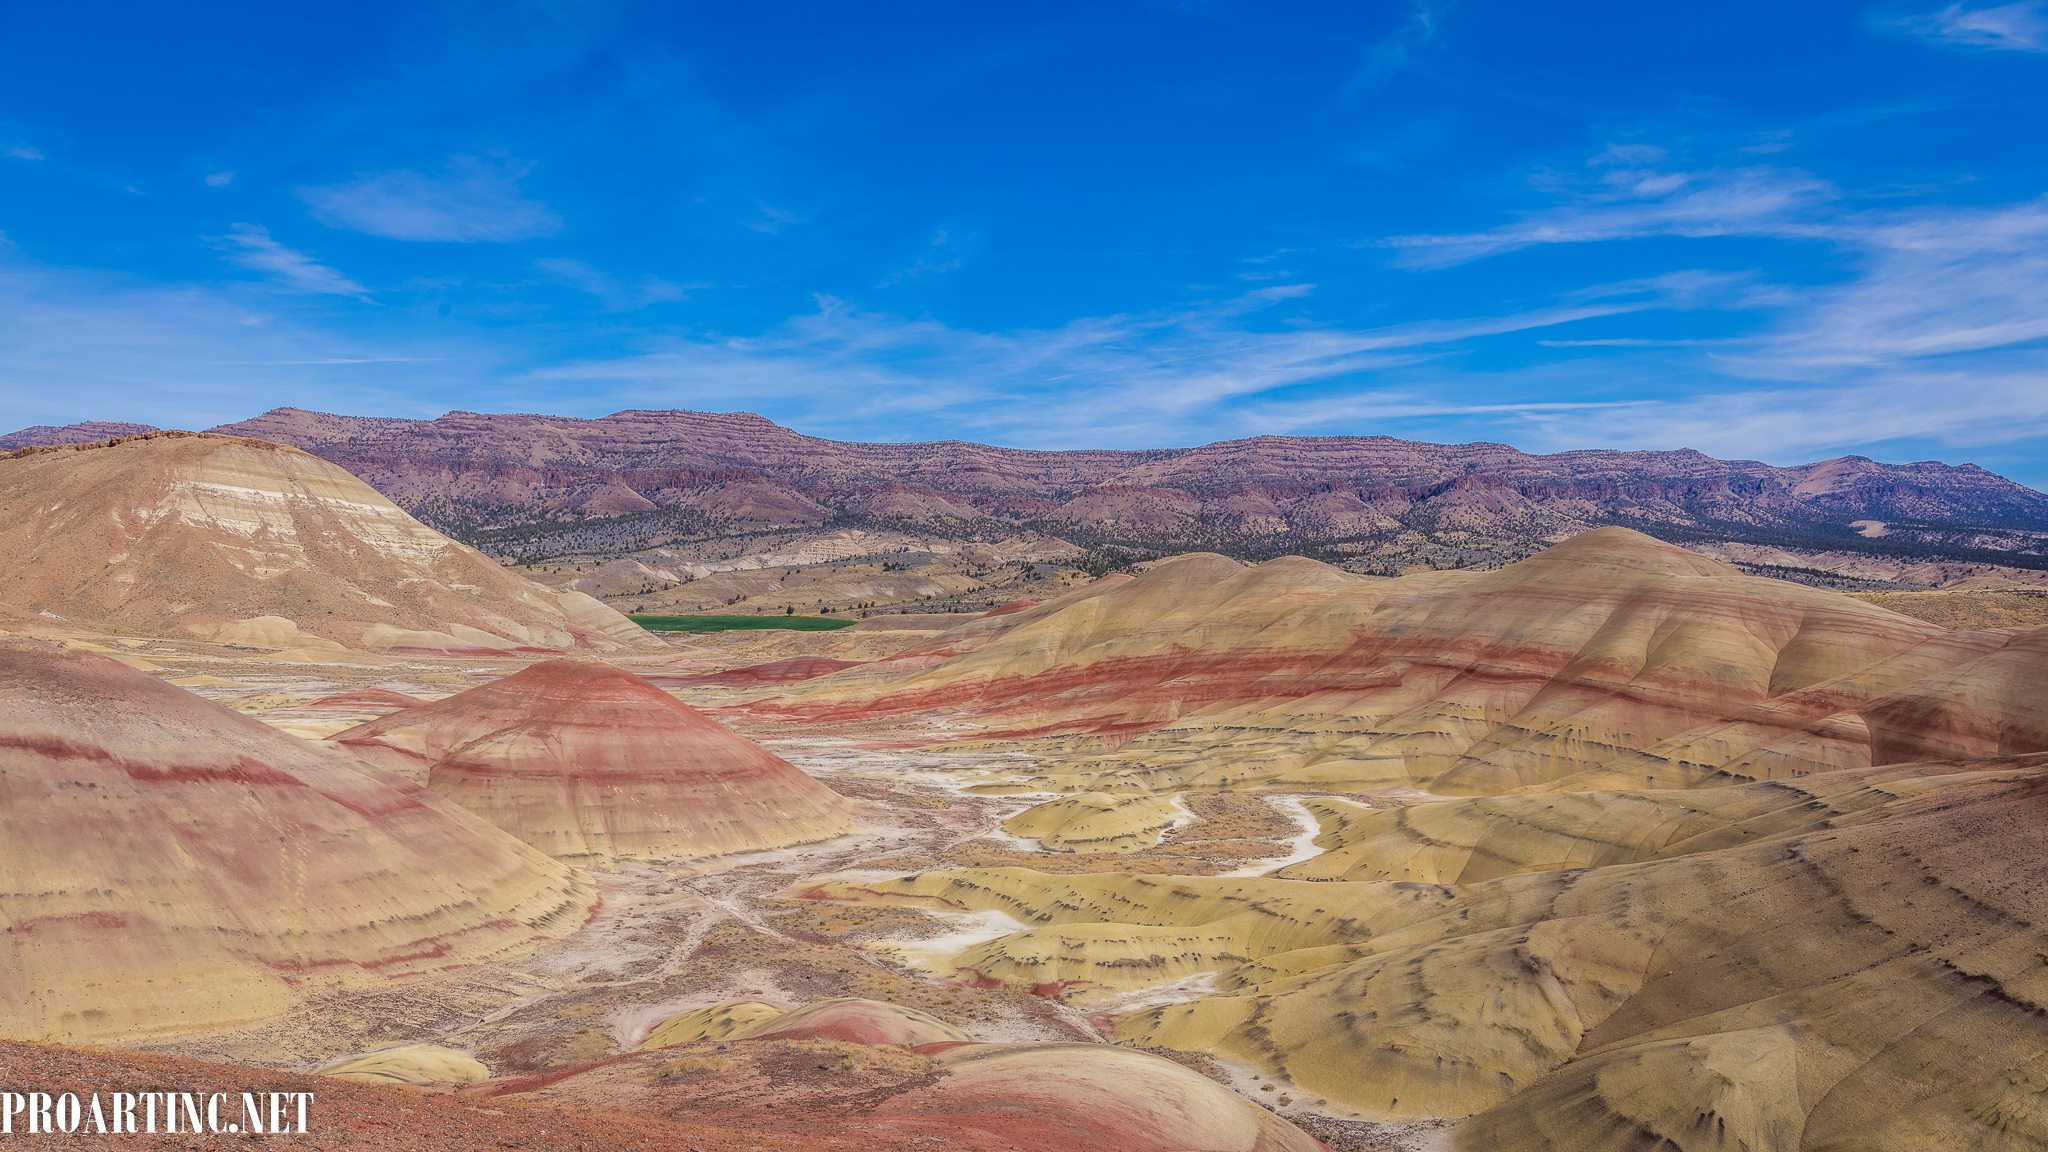 Carroll Rim Trail, John Day Fossil Beds National Monument, Oregon